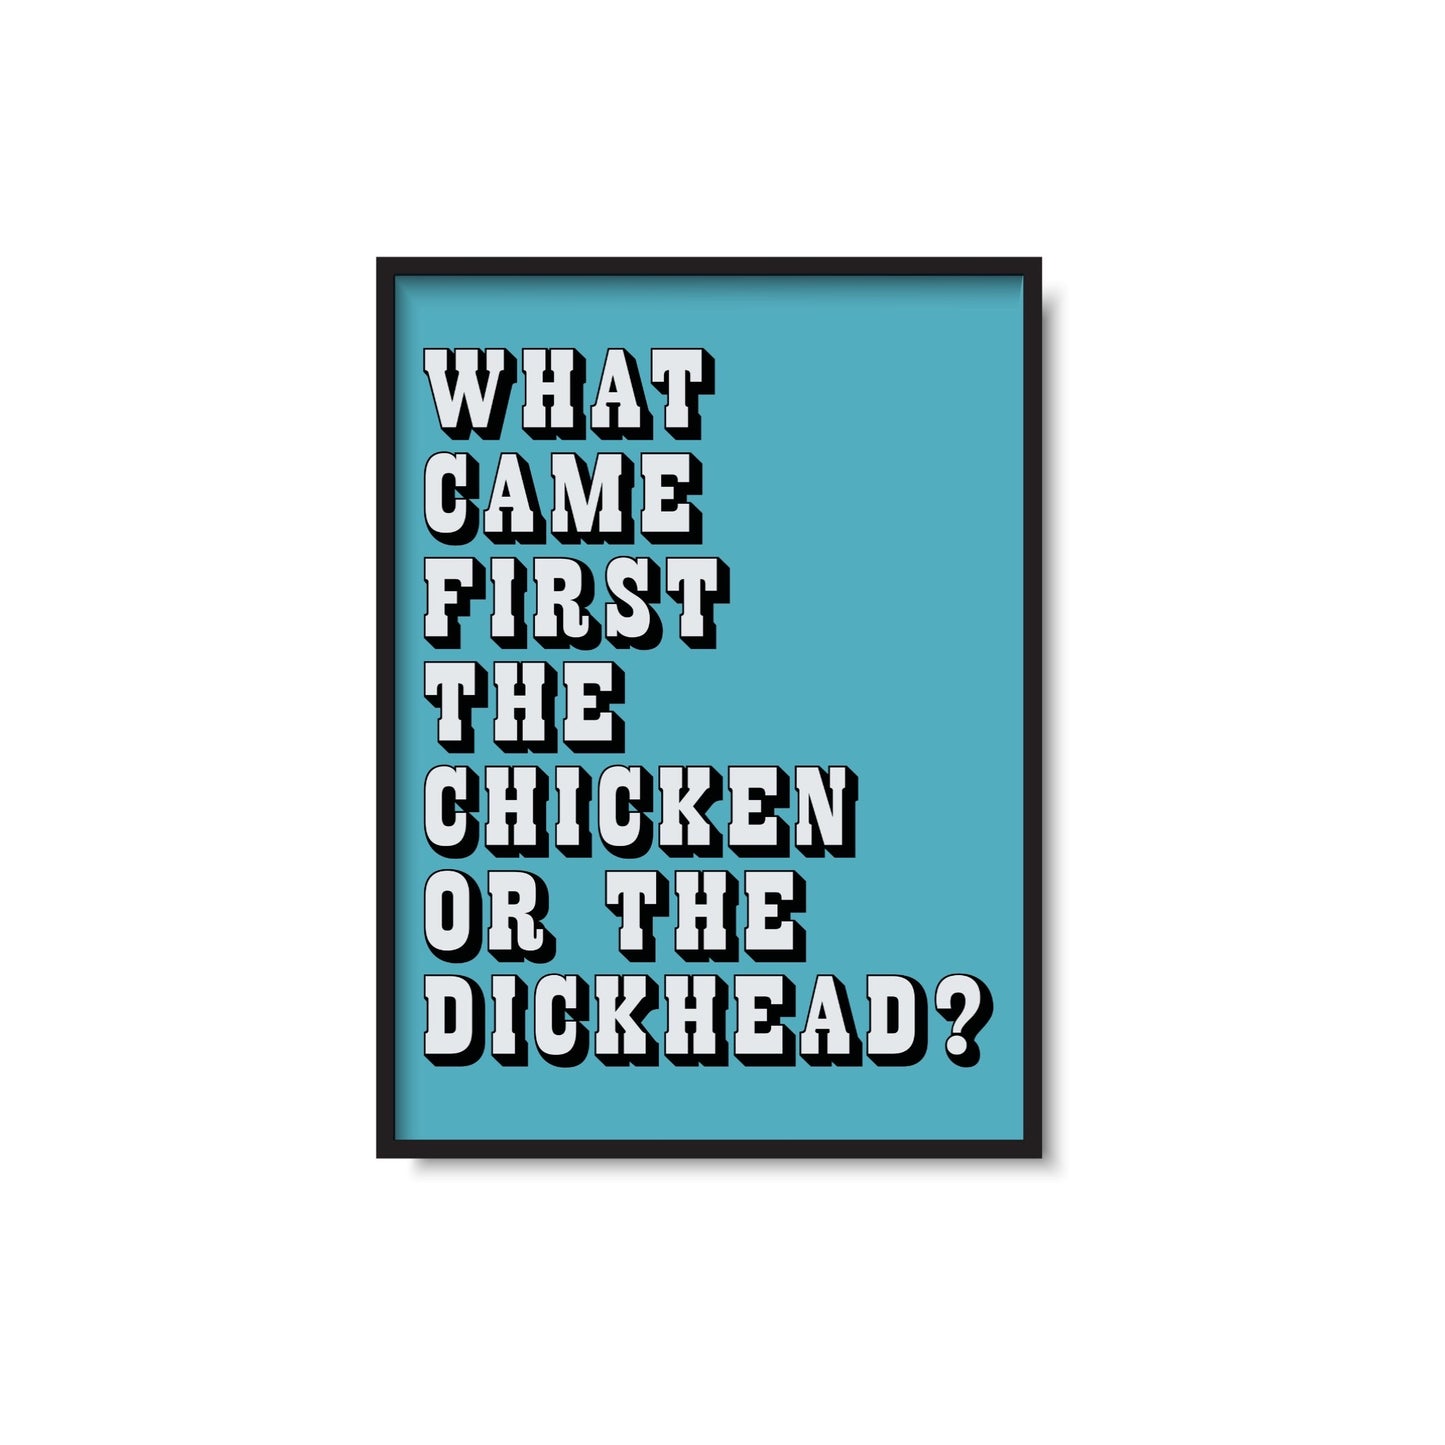 What Came First The Chicken Or The Dickhead? Print